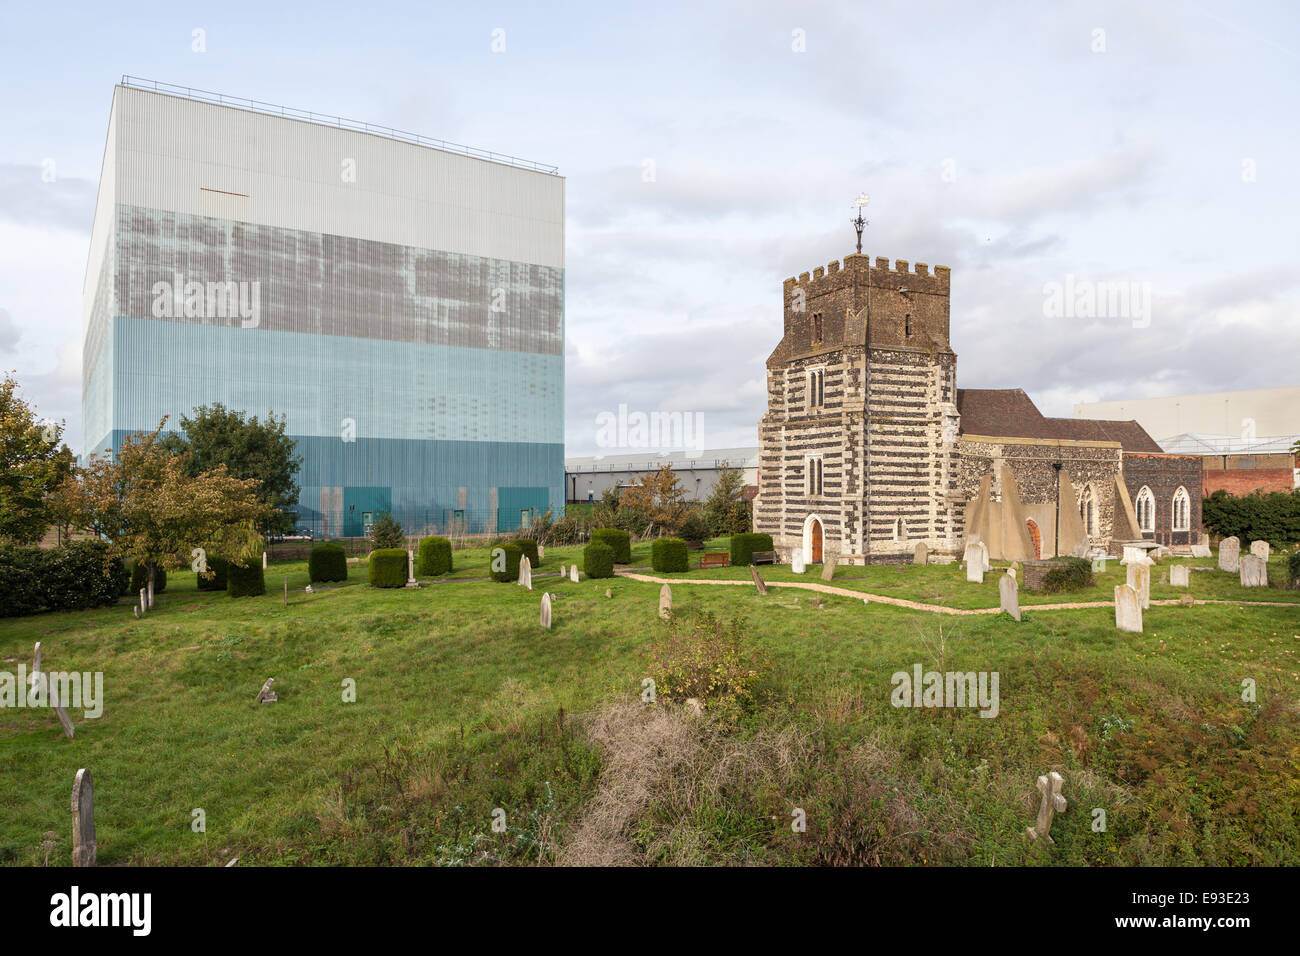 St Clement's Church next to Procter & Gamble building in West Thurrock, Essex, England. Stock Photo